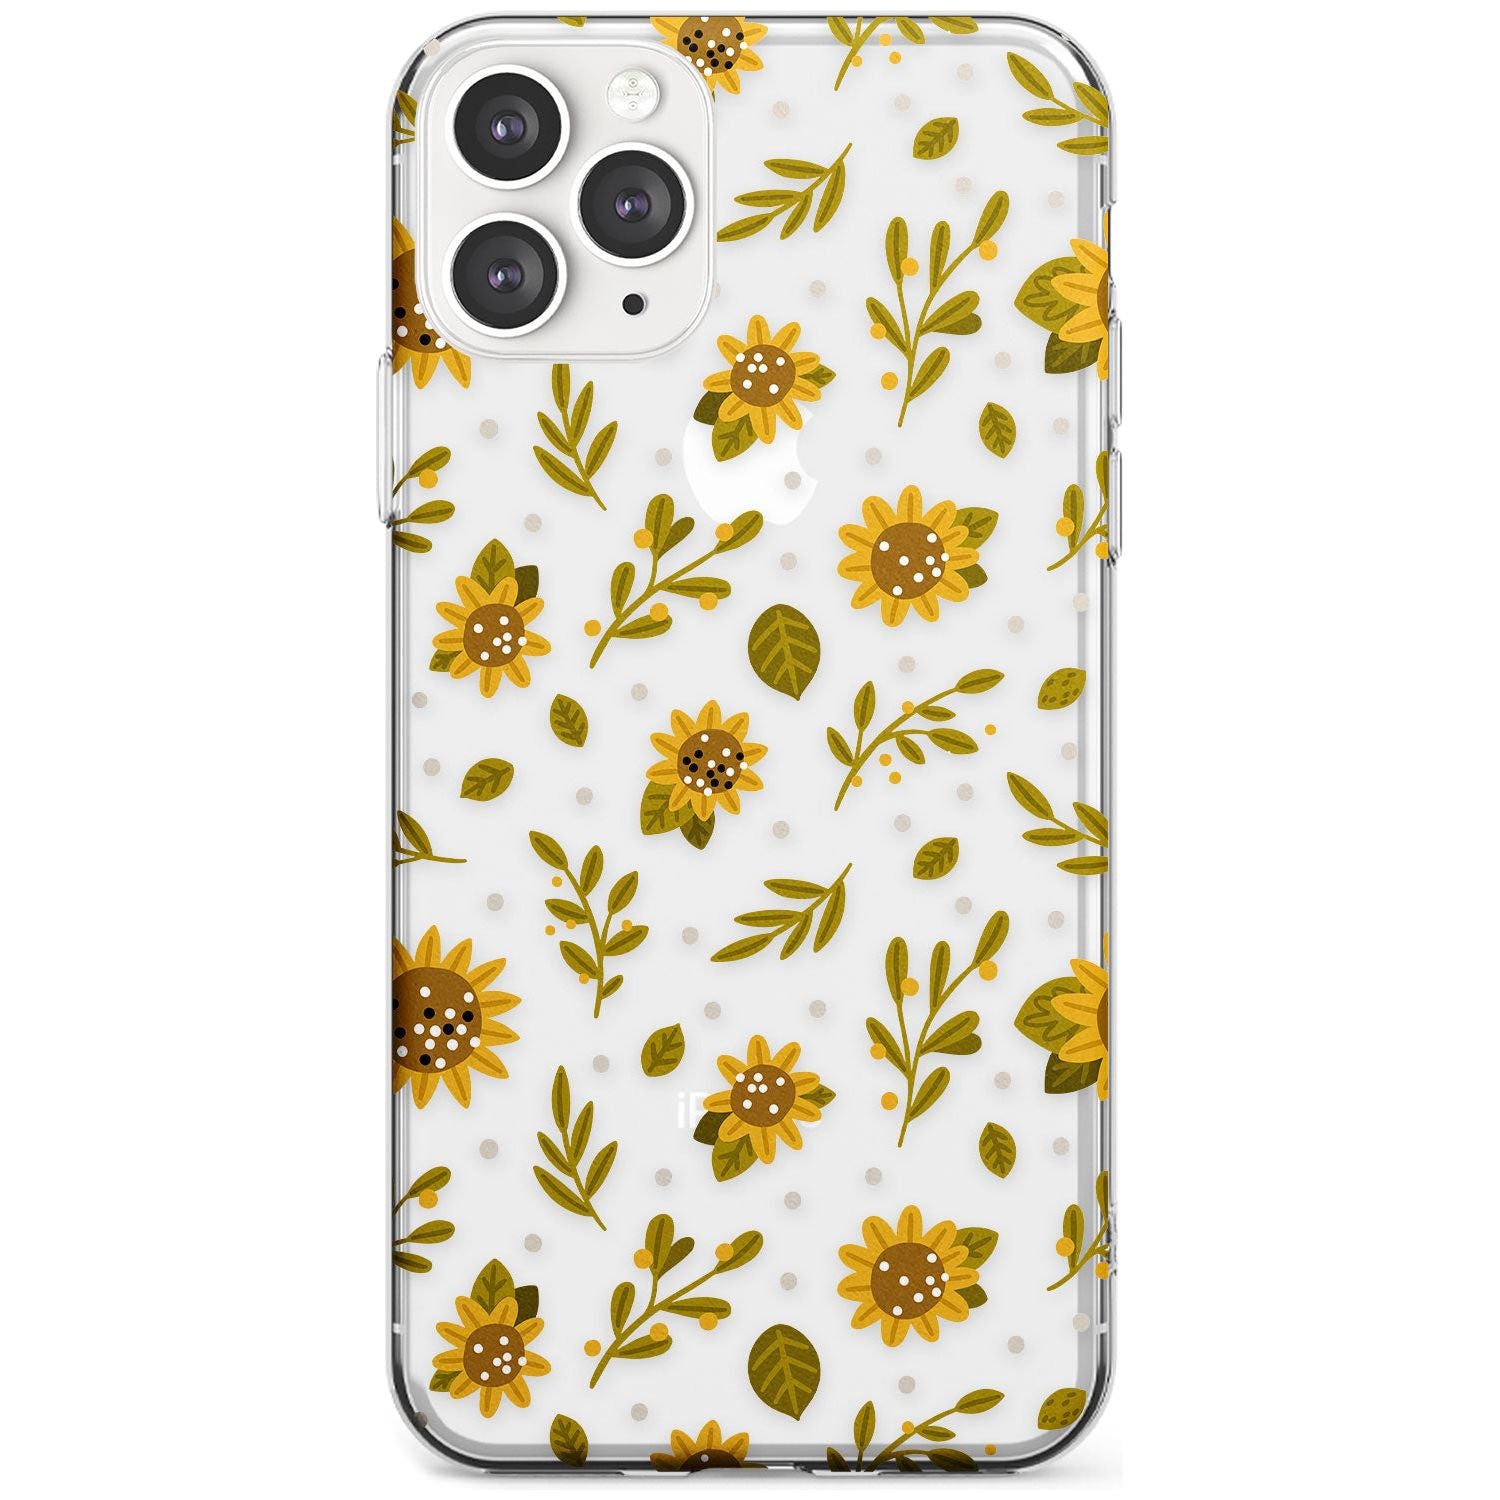 Sweet as Honey Patterns: Sunflowers (Clear) Slim TPU Phone Case for iPhone 11 Pro Max